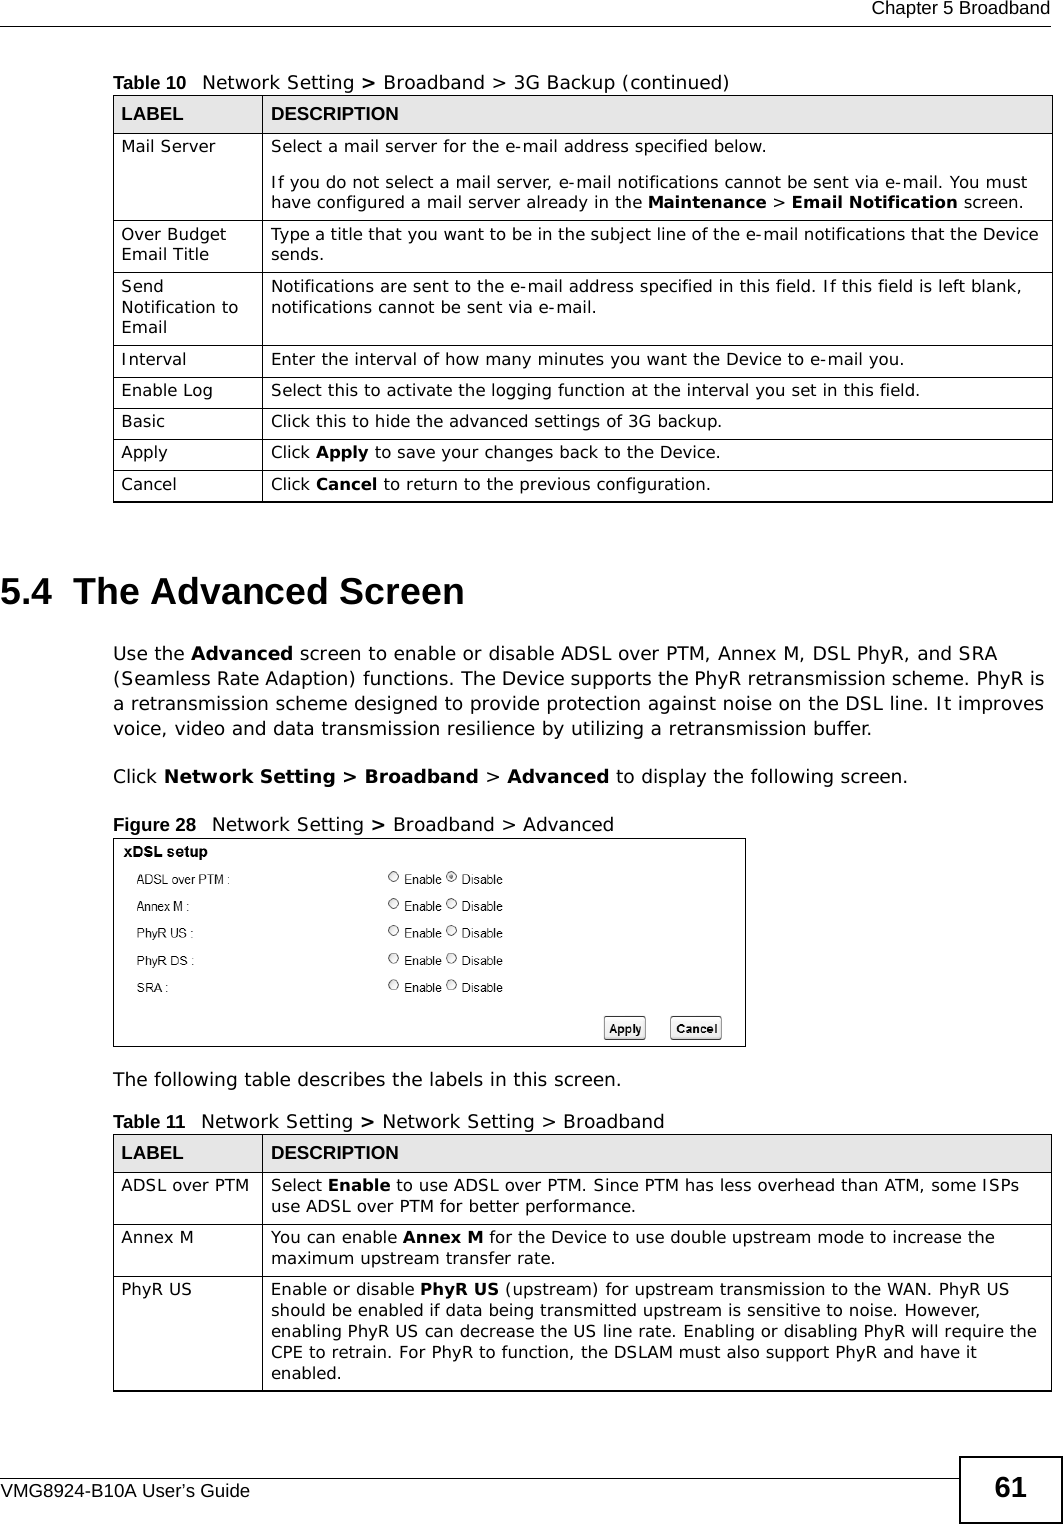  Chapter 5 BroadbandVMG8924-B10A User’s Guide 615.4  The Advanced ScreenUse the Advanced screen to enable or disable ADSL over PTM, Annex M, DSL PhyR, and SRA (Seamless Rate Adaption) functions. The Device supports the PhyR retransmission scheme. PhyR is a retransmission scheme designed to provide protection against noise on the DSL line. It improves voice, video and data transmission resilience by utilizing a retransmission buffer.Click Network Setting &gt; Broadband &gt; Advanced to display the following screen.Figure 28   Network Setting &gt; Broadband &gt; Advanced The following table describes the labels in this screen. Mail Server Select a mail server for the e-mail address specified below. If you do not select a mail server, e-mail notifications cannot be sent via e-mail. You must have configured a mail server already in the Maintenance &gt; Email Notification screen.Over Budget Email Title Type a title that you want to be in the subject line of the e-mail notifications that the Device sends.Send Notification to EmailNotifications are sent to the e-mail address specified in this field. If this field is left blank, notifications cannot be sent via e-mail. Interval Enter the interval of how many minutes you want the Device to e-mail you.Enable Log Select this to activate the logging function at the interval you set in this field. Basic Click this to hide the advanced settings of 3G backup.Apply Click Apply to save your changes back to the Device.Cancel Click Cancel to return to the previous configuration.Table 10   Network Setting &gt; Broadband &gt; 3G Backup (continued)LABEL DESCRIPTIONTable 11   Network Setting &gt; Network Setting &gt; BroadbandLABEL DESCRIPTIONADSL over PTM Select Enable to use ADSL over PTM. Since PTM has less overhead than ATM, some ISPs use ADSL over PTM for better performance.Annex M You can enable Annex M for the Device to use double upstream mode to increase the maximum upstream transfer rate.PhyR US Enable or disable PhyR US (upstream) for upstream transmission to the WAN. PhyR US should be enabled if data being transmitted upstream is sensitive to noise. However, enabling PhyR US can decrease the US line rate. Enabling or disabling PhyR will require the CPE to retrain. For PhyR to function, the DSLAM must also support PhyR and have it enabled.